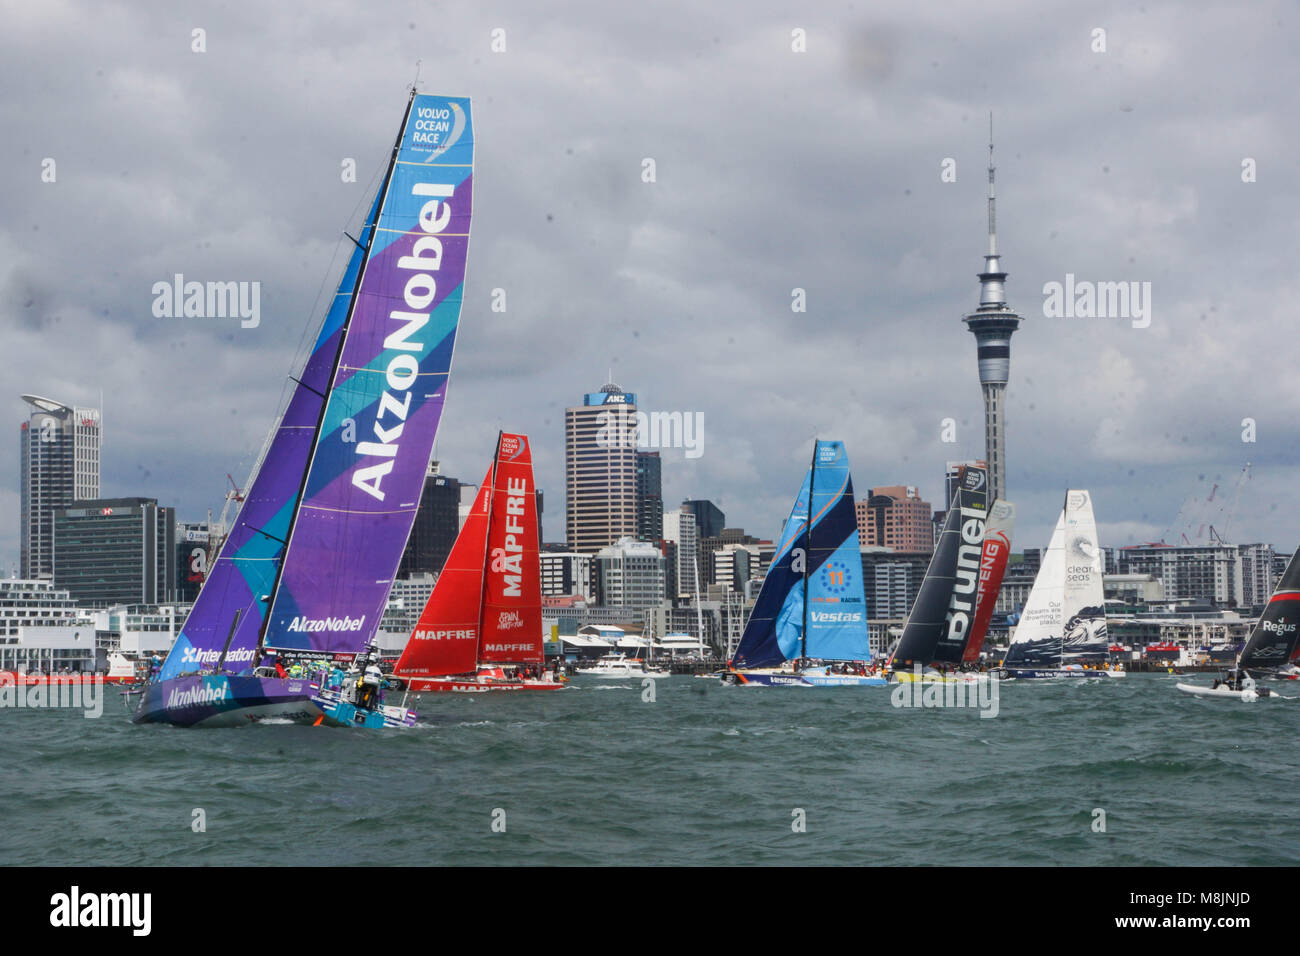 Auckland, New Zealand. 18th Mar, 2018. The Volvo Ocean Race fleet Departs to Itajai, Brazil at Viaduct Harbour in Auckland on Mar 18, 2018. The Volvo Ocean Race is the world's most prestigious sailing yacht race around the world, held every three years. Auckland is one of 12 host cities on the round the world route. Credit: Shirley Kwok /Pacific Press/Alamy Live News Stock Photo